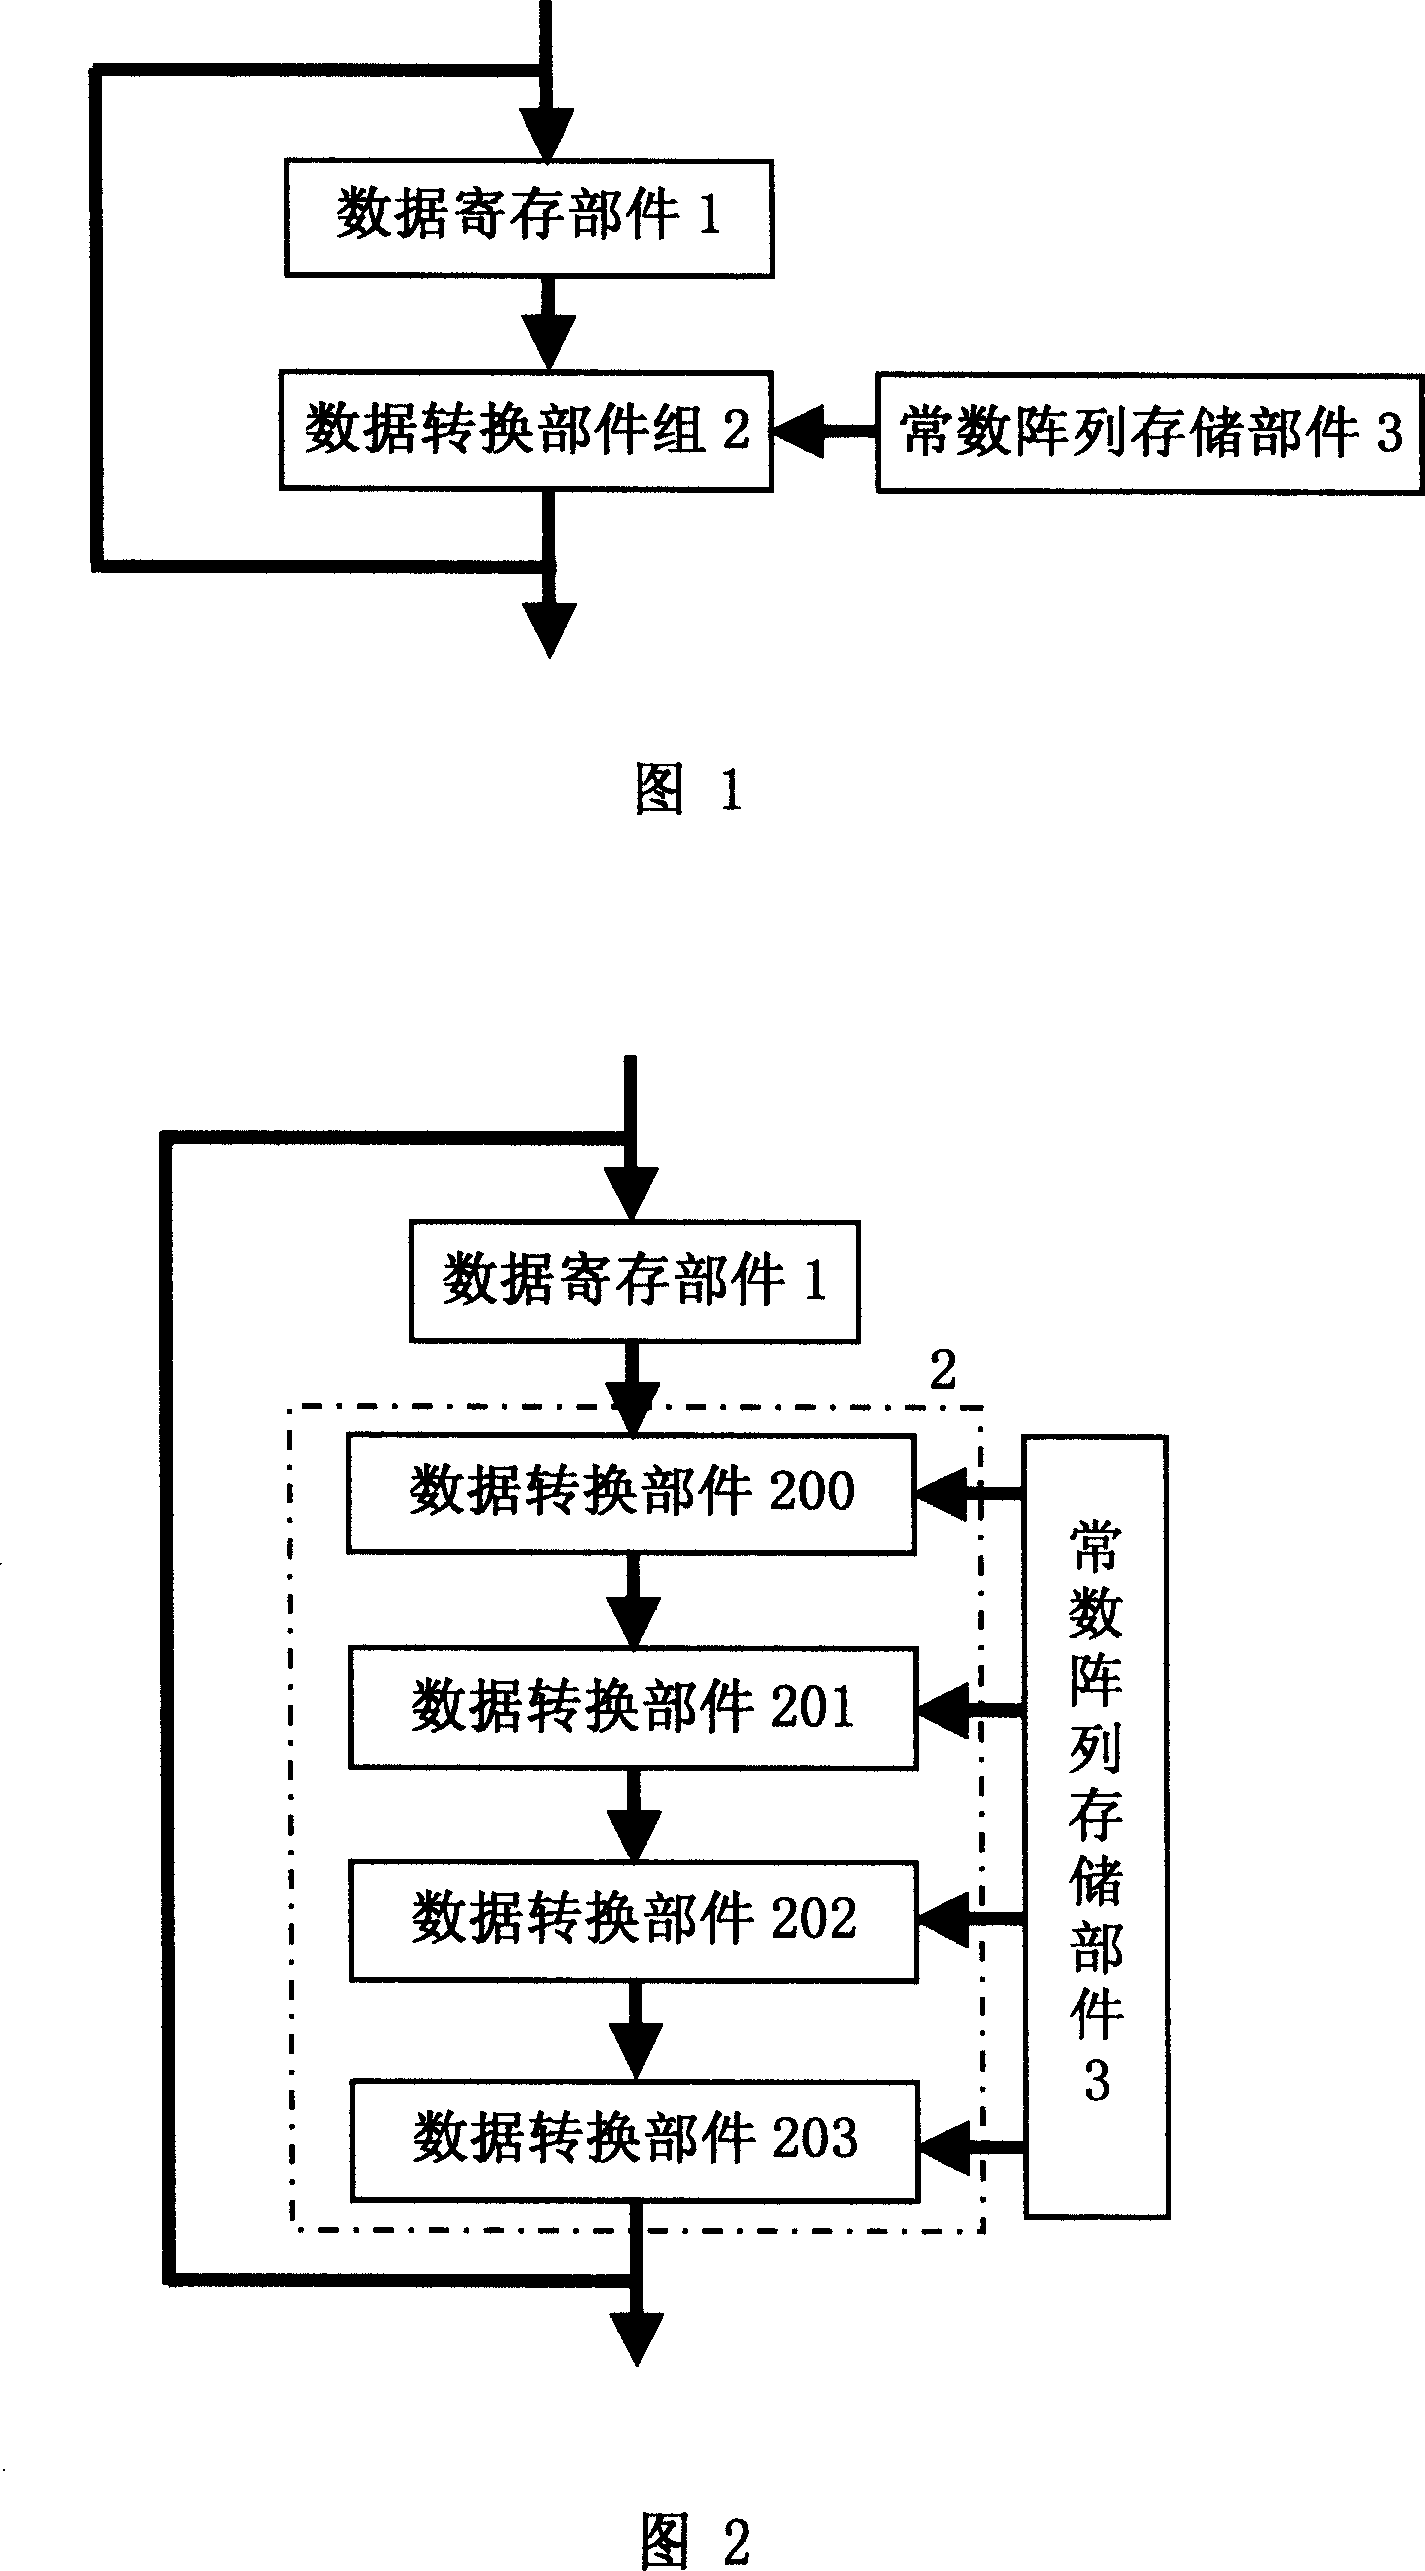 Apparatus for realizing SMS4 enciphering and deciphering algorithm